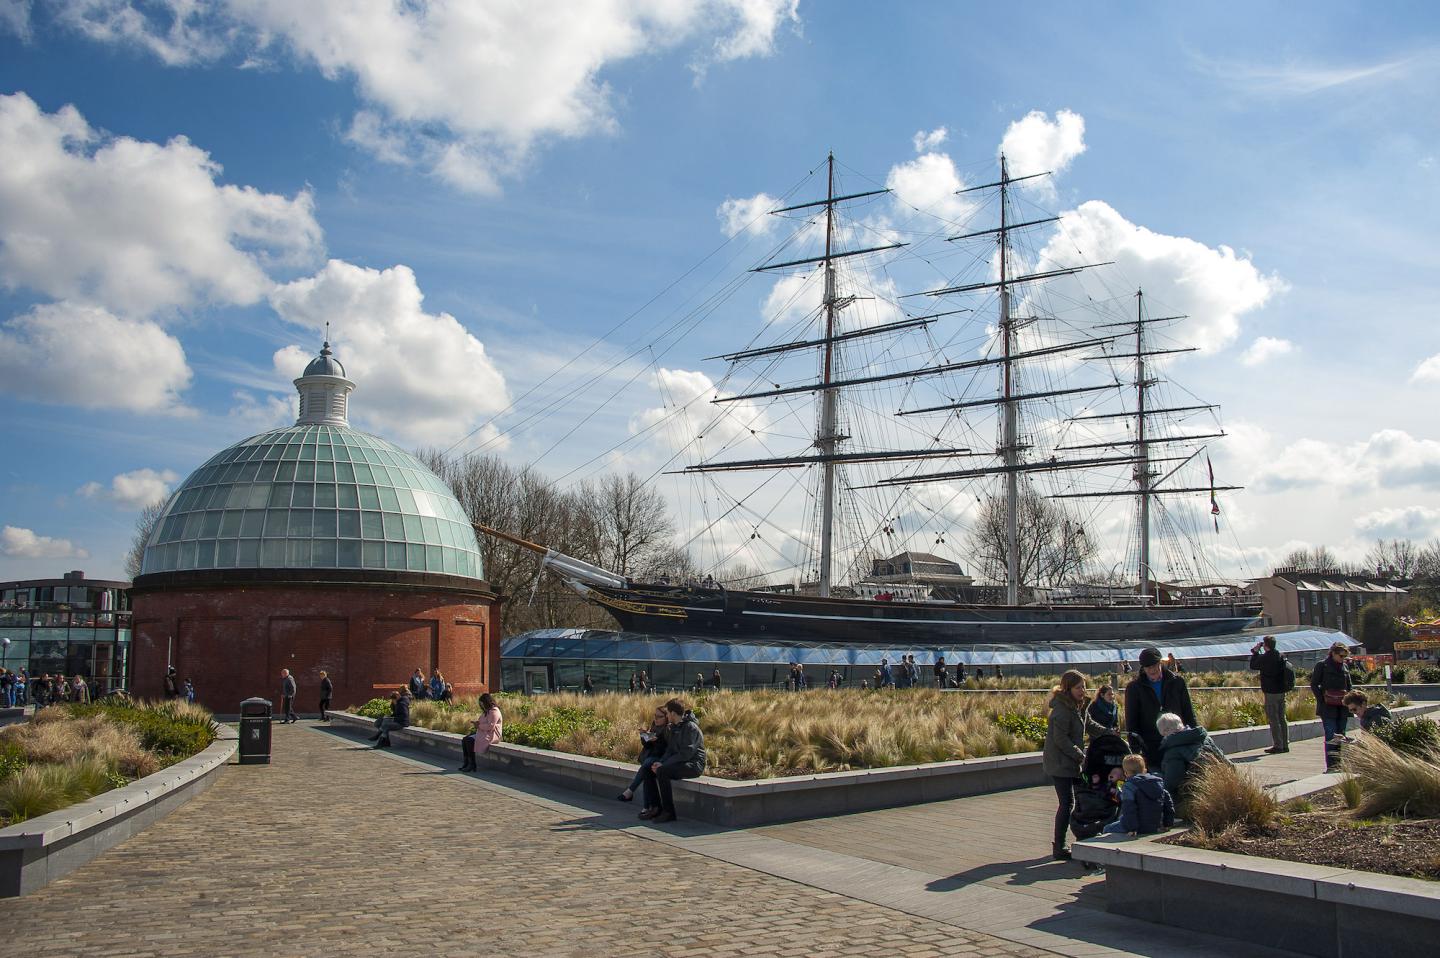 A view of the historic ship Cutty Sark in the dry dock at Greenwich